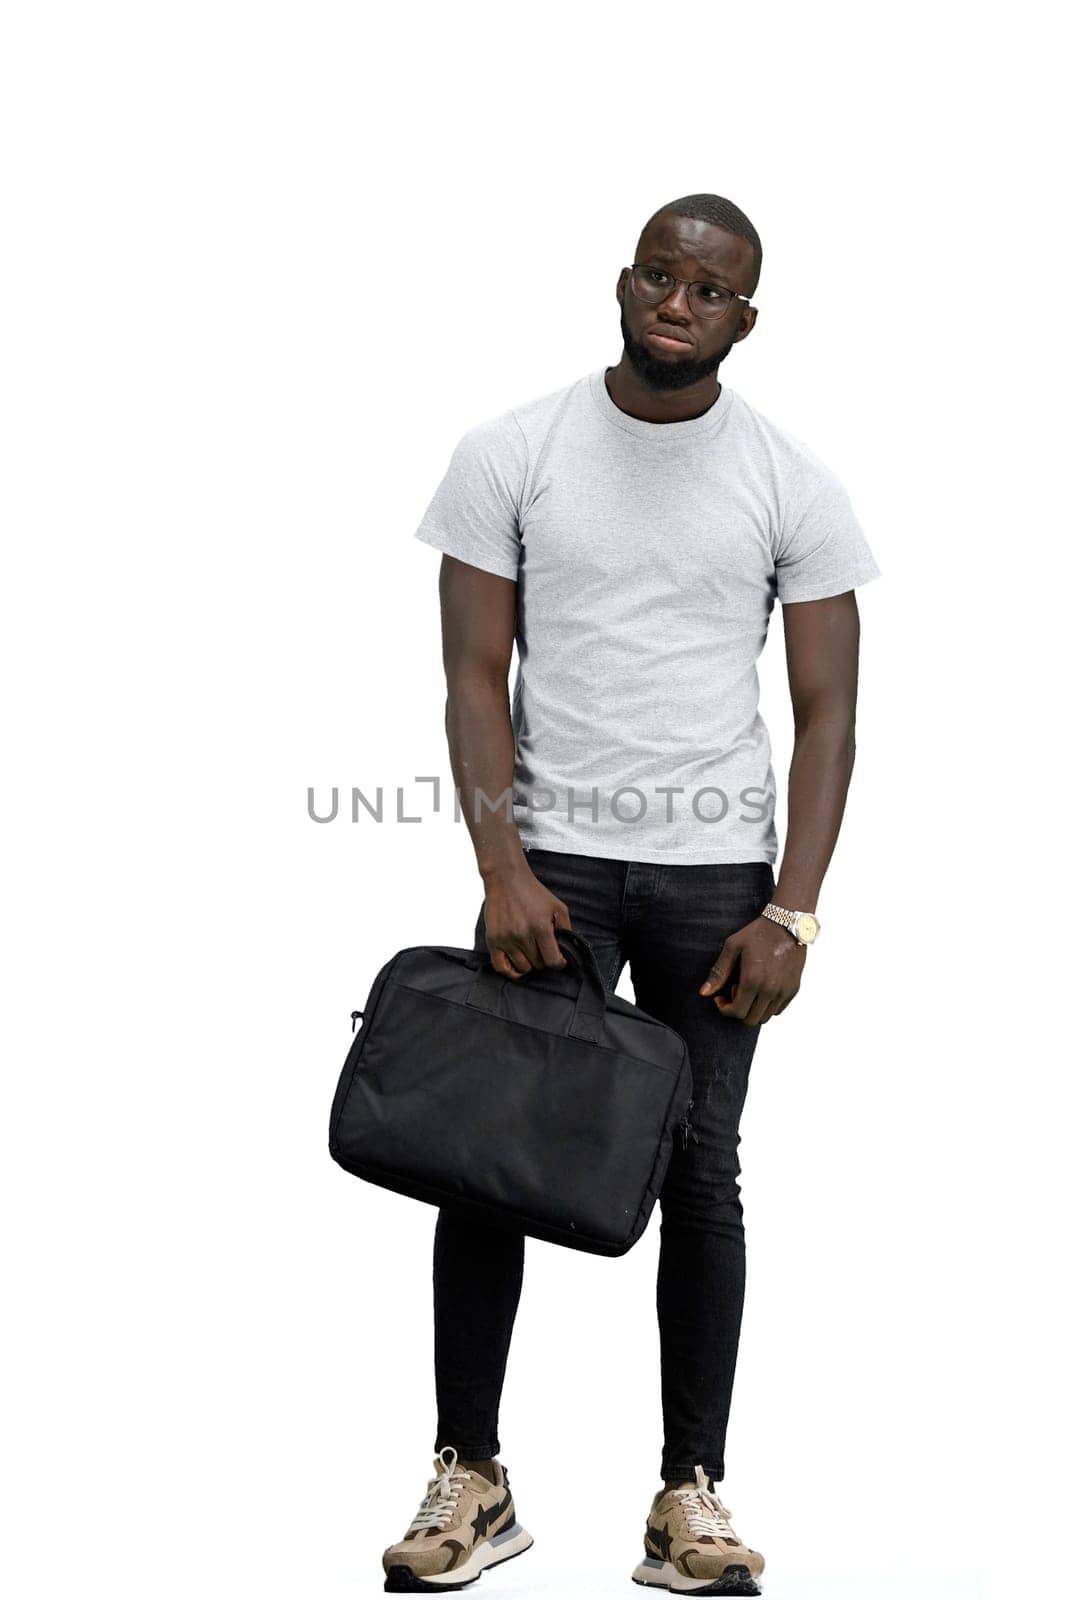 A man, full-length, on a white background, with a briefcase.